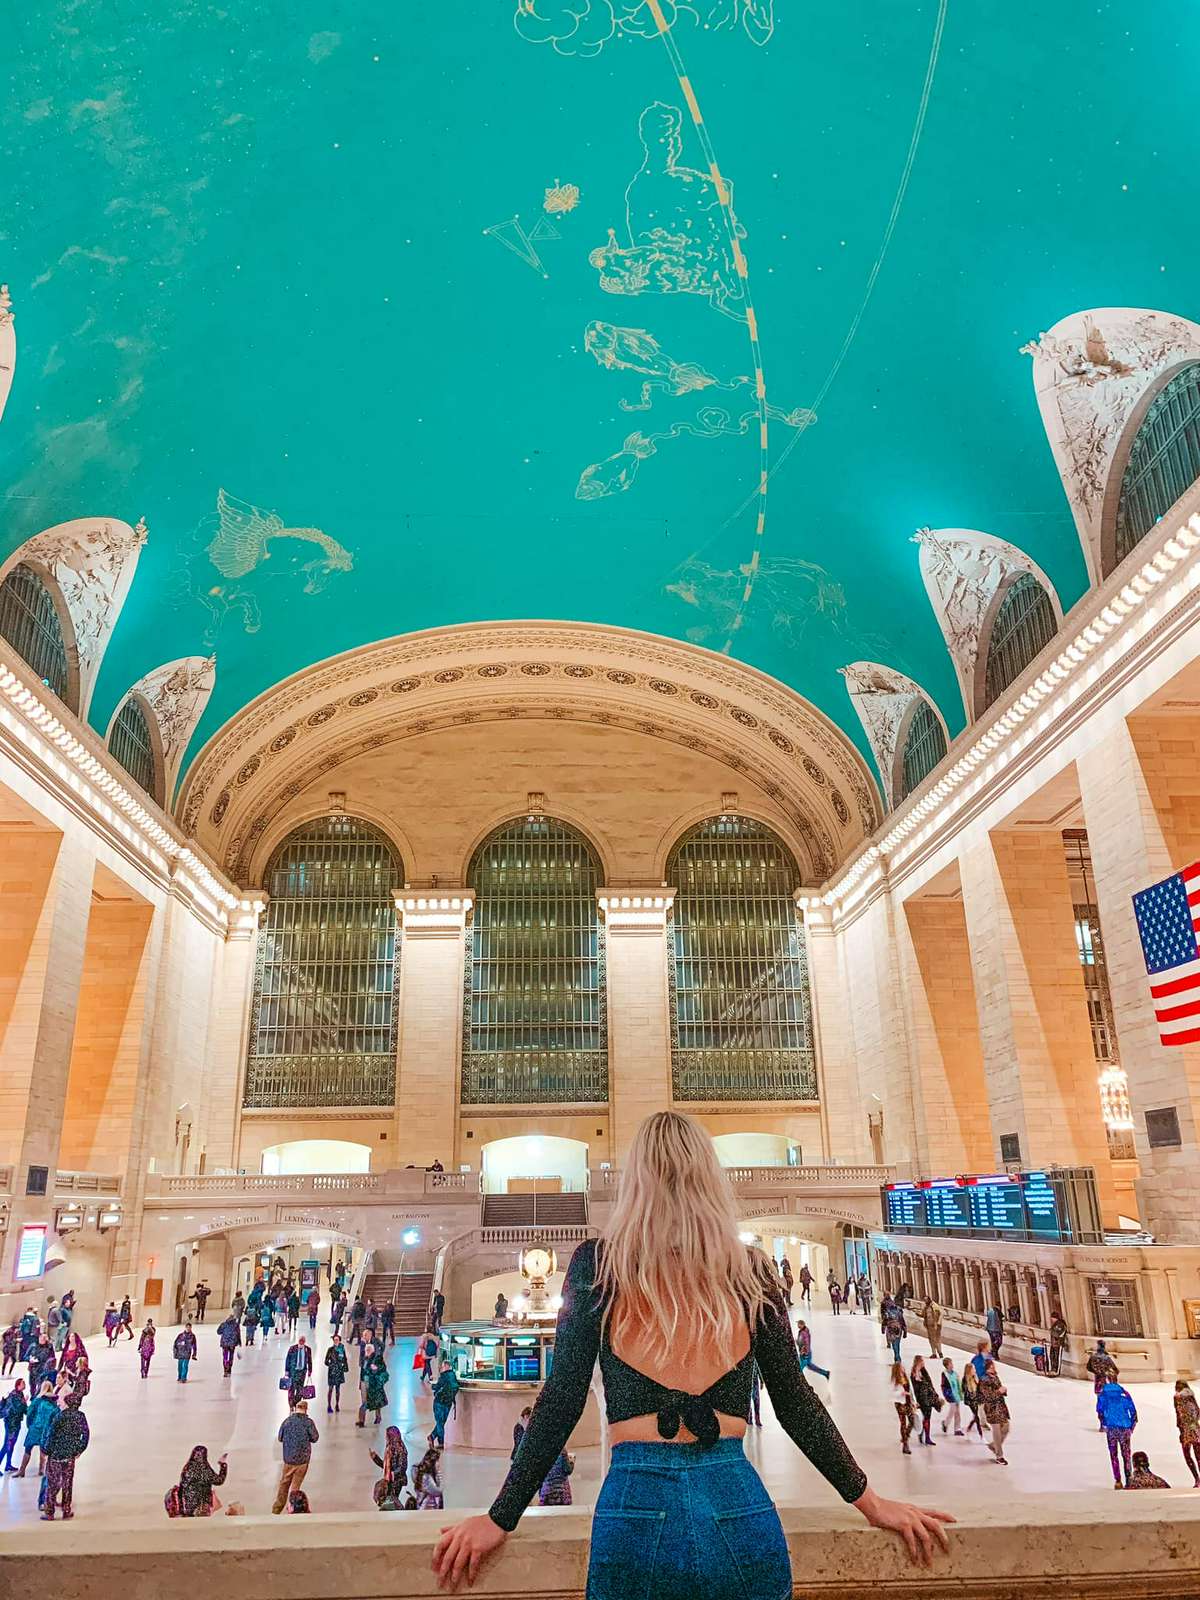 Beautiful ceiling view of Grand Central Station in NYC